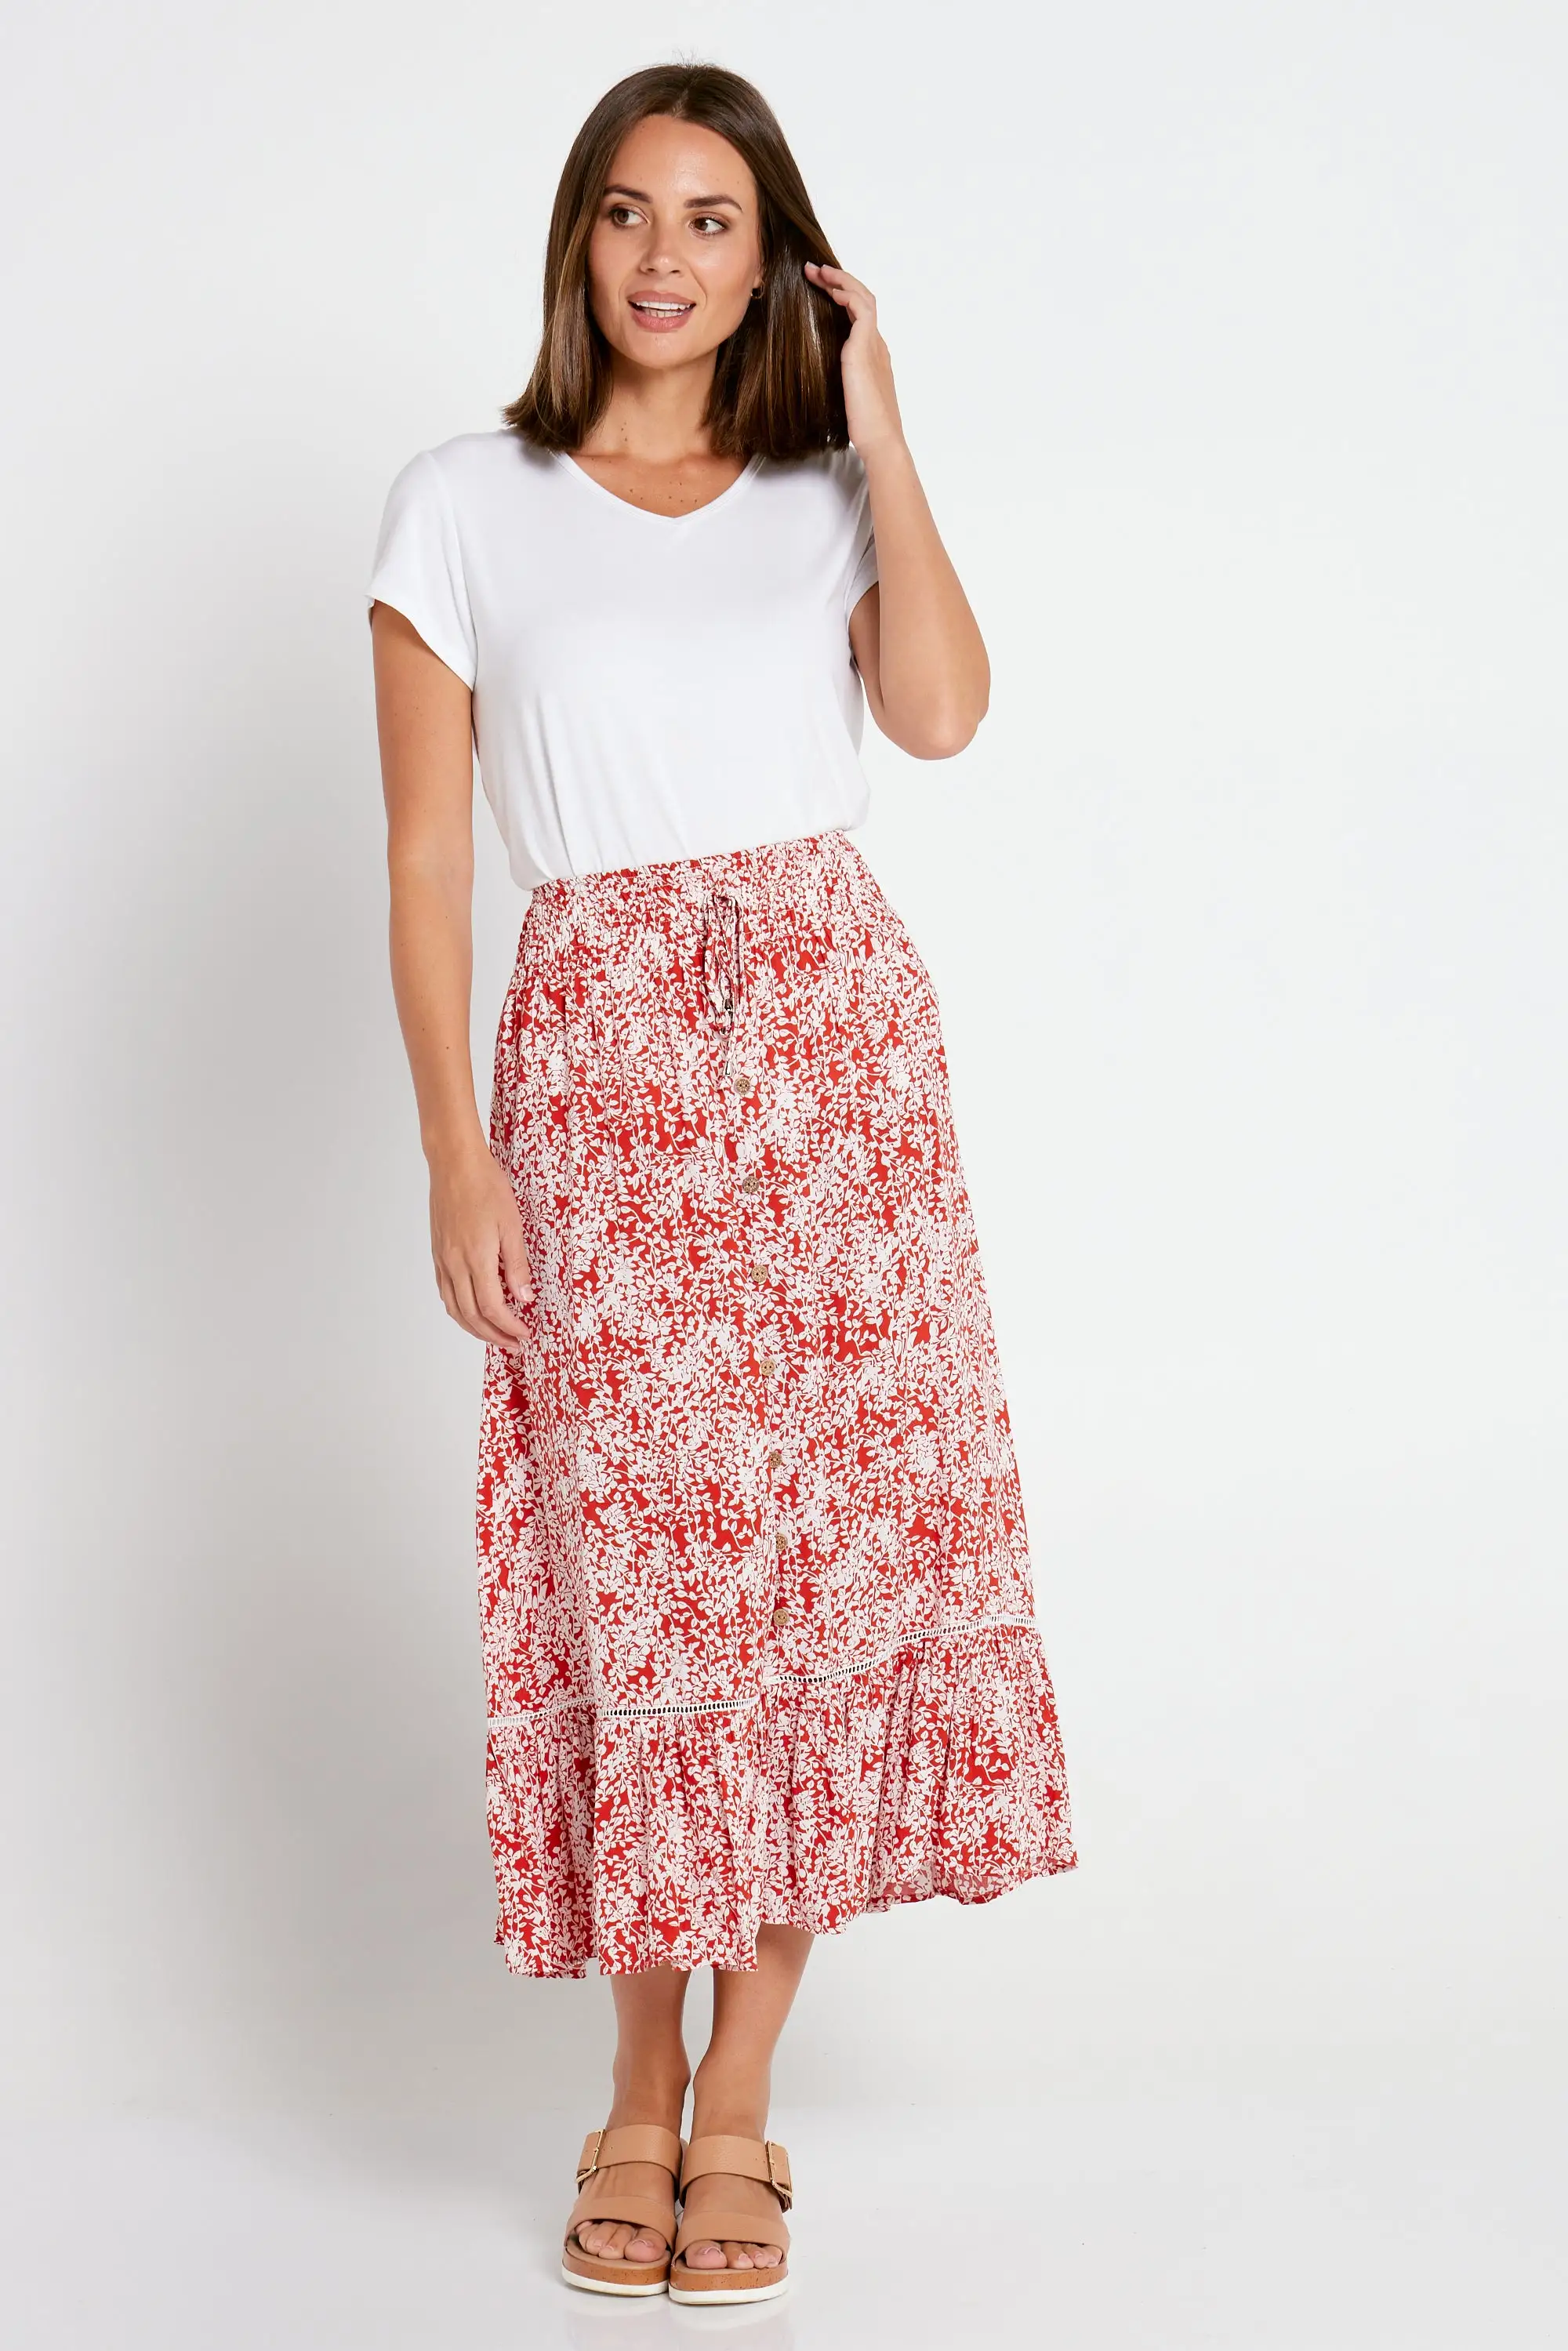 Pearl Maxi Skirt - Rust Floral